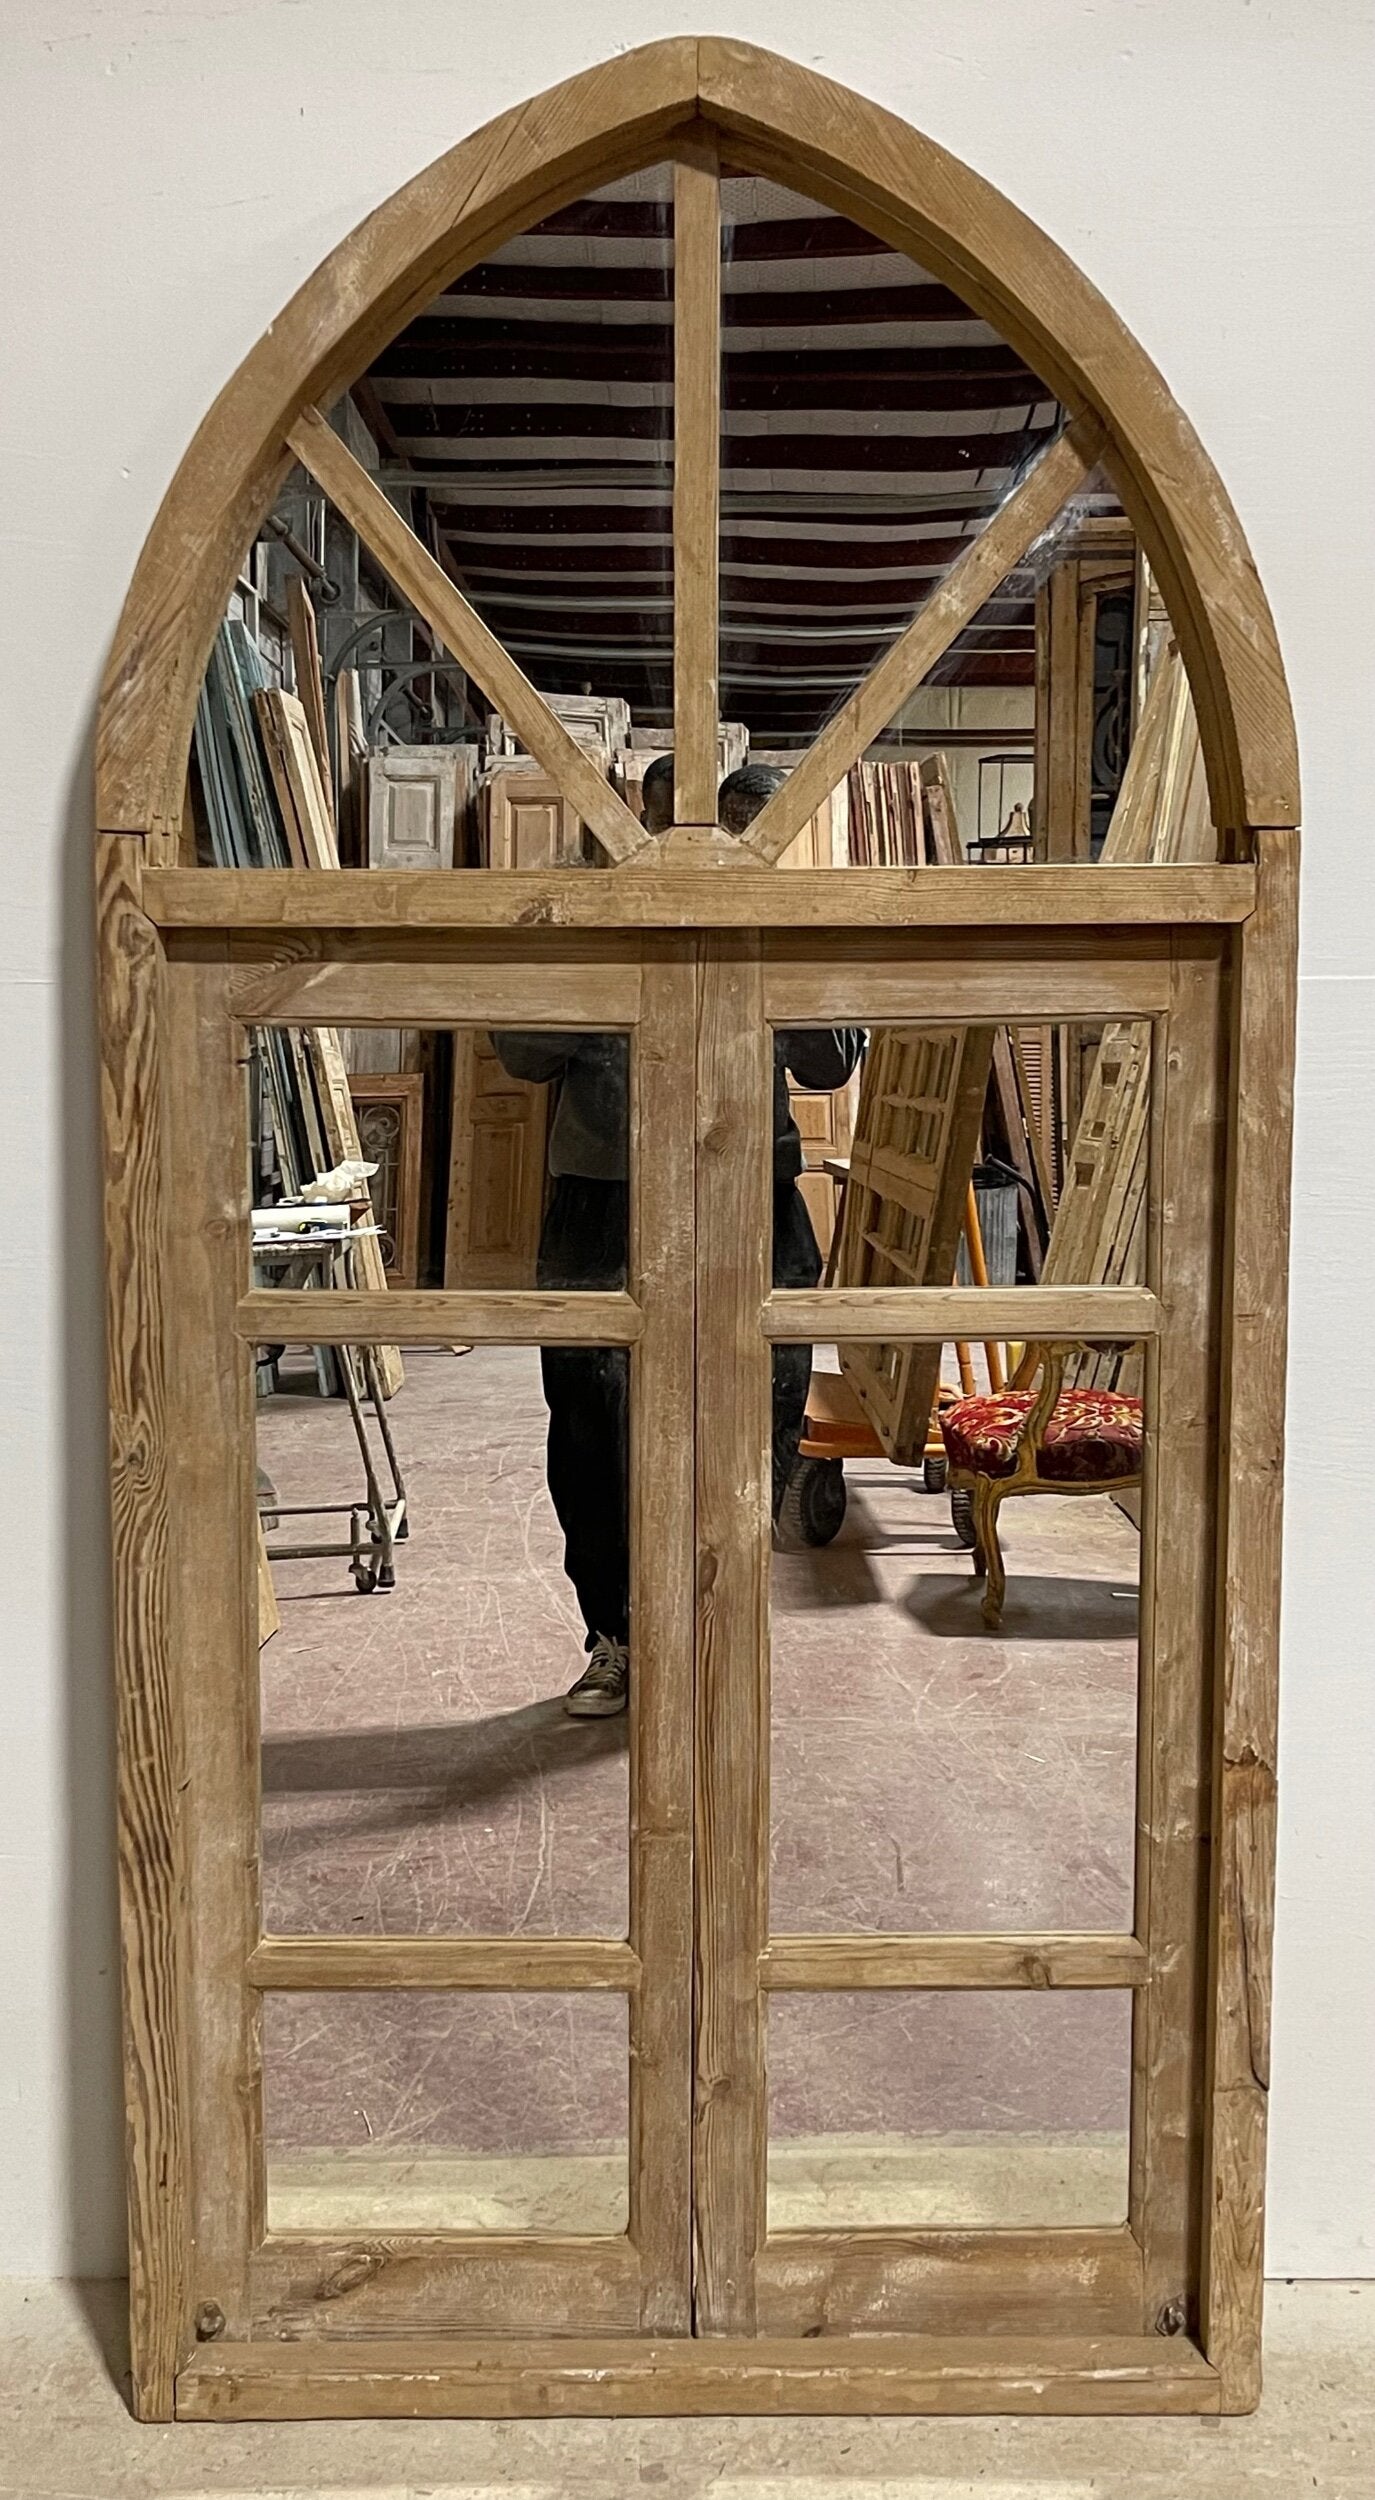 Framed arched mirror (77x38.25) H0290s